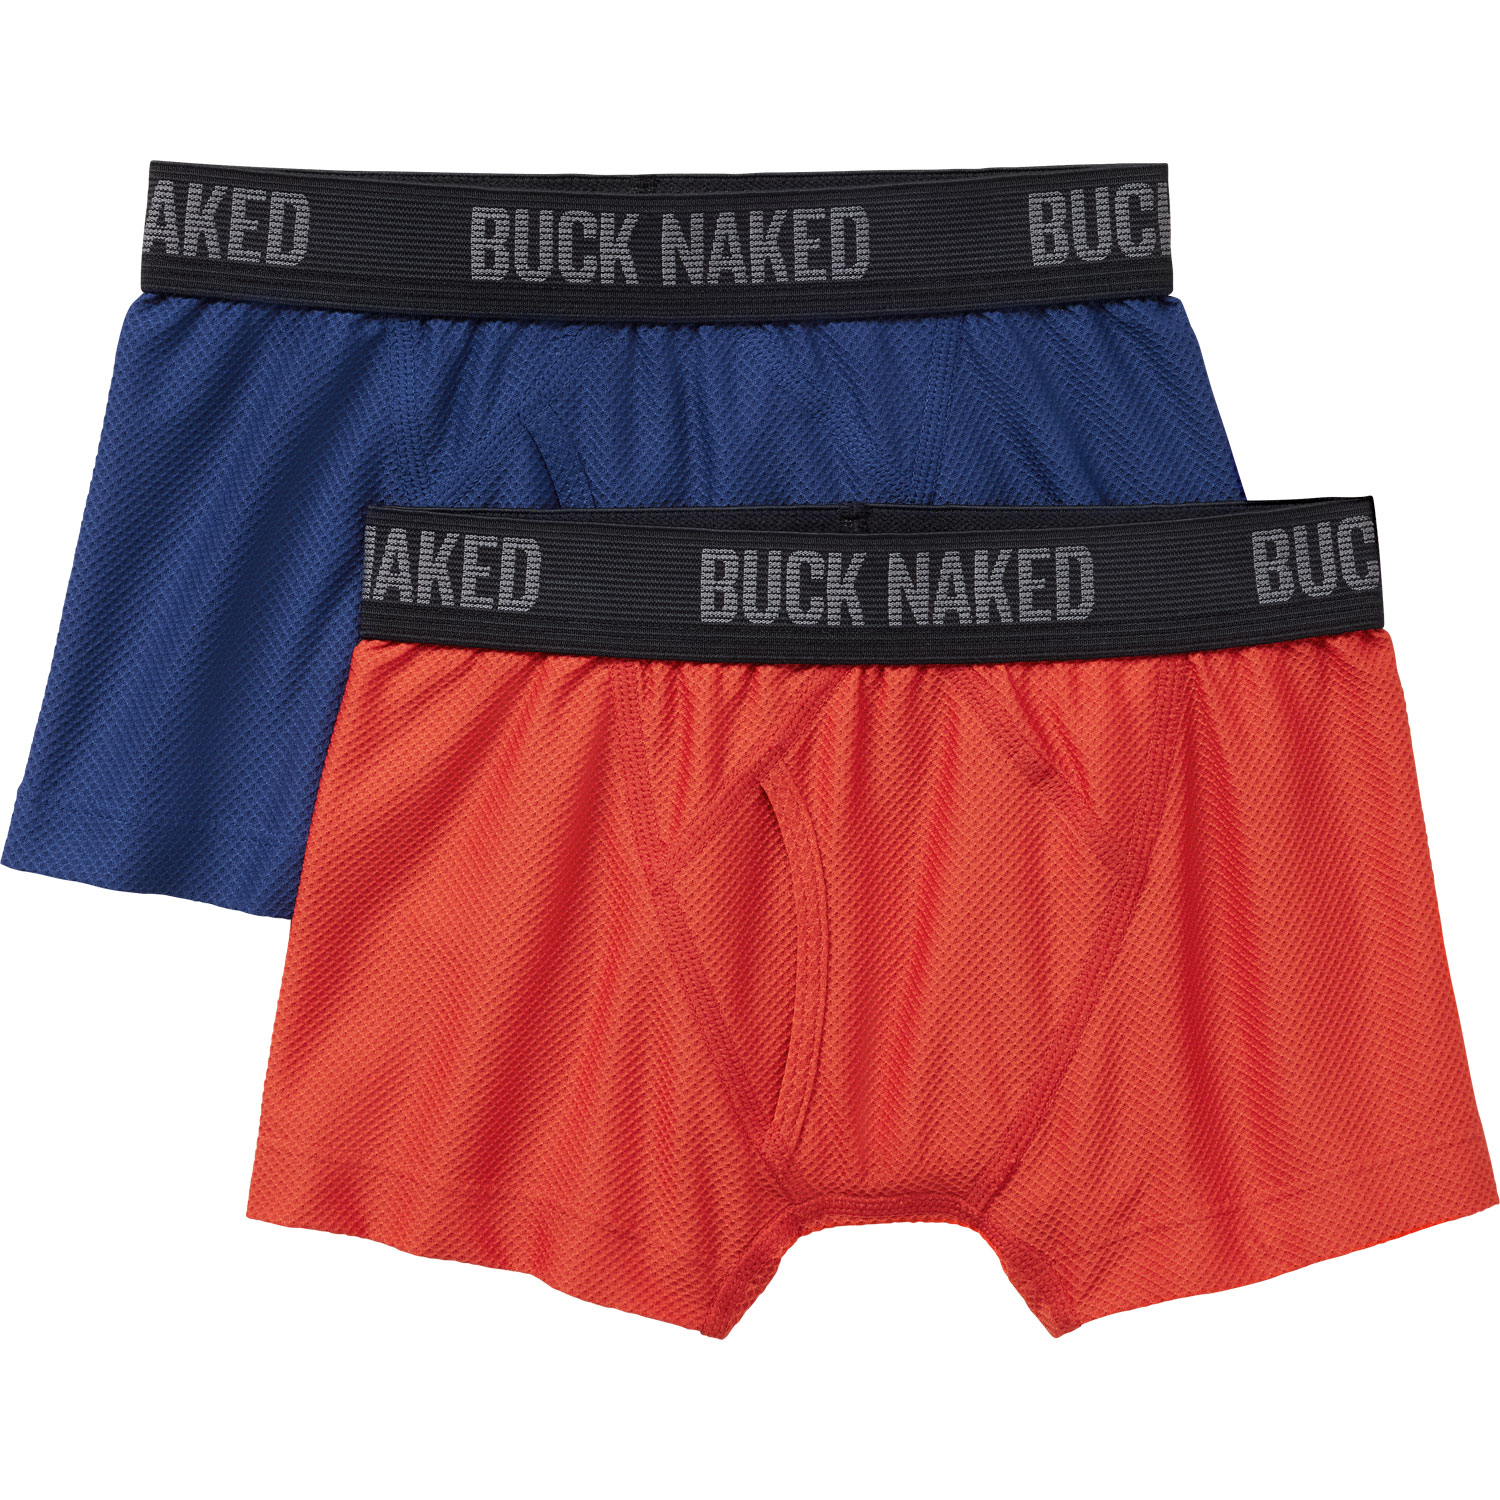 Duluth Buck Naked Boxer Briefs after a week or two. Bad egg? :  r/BuyItForLife